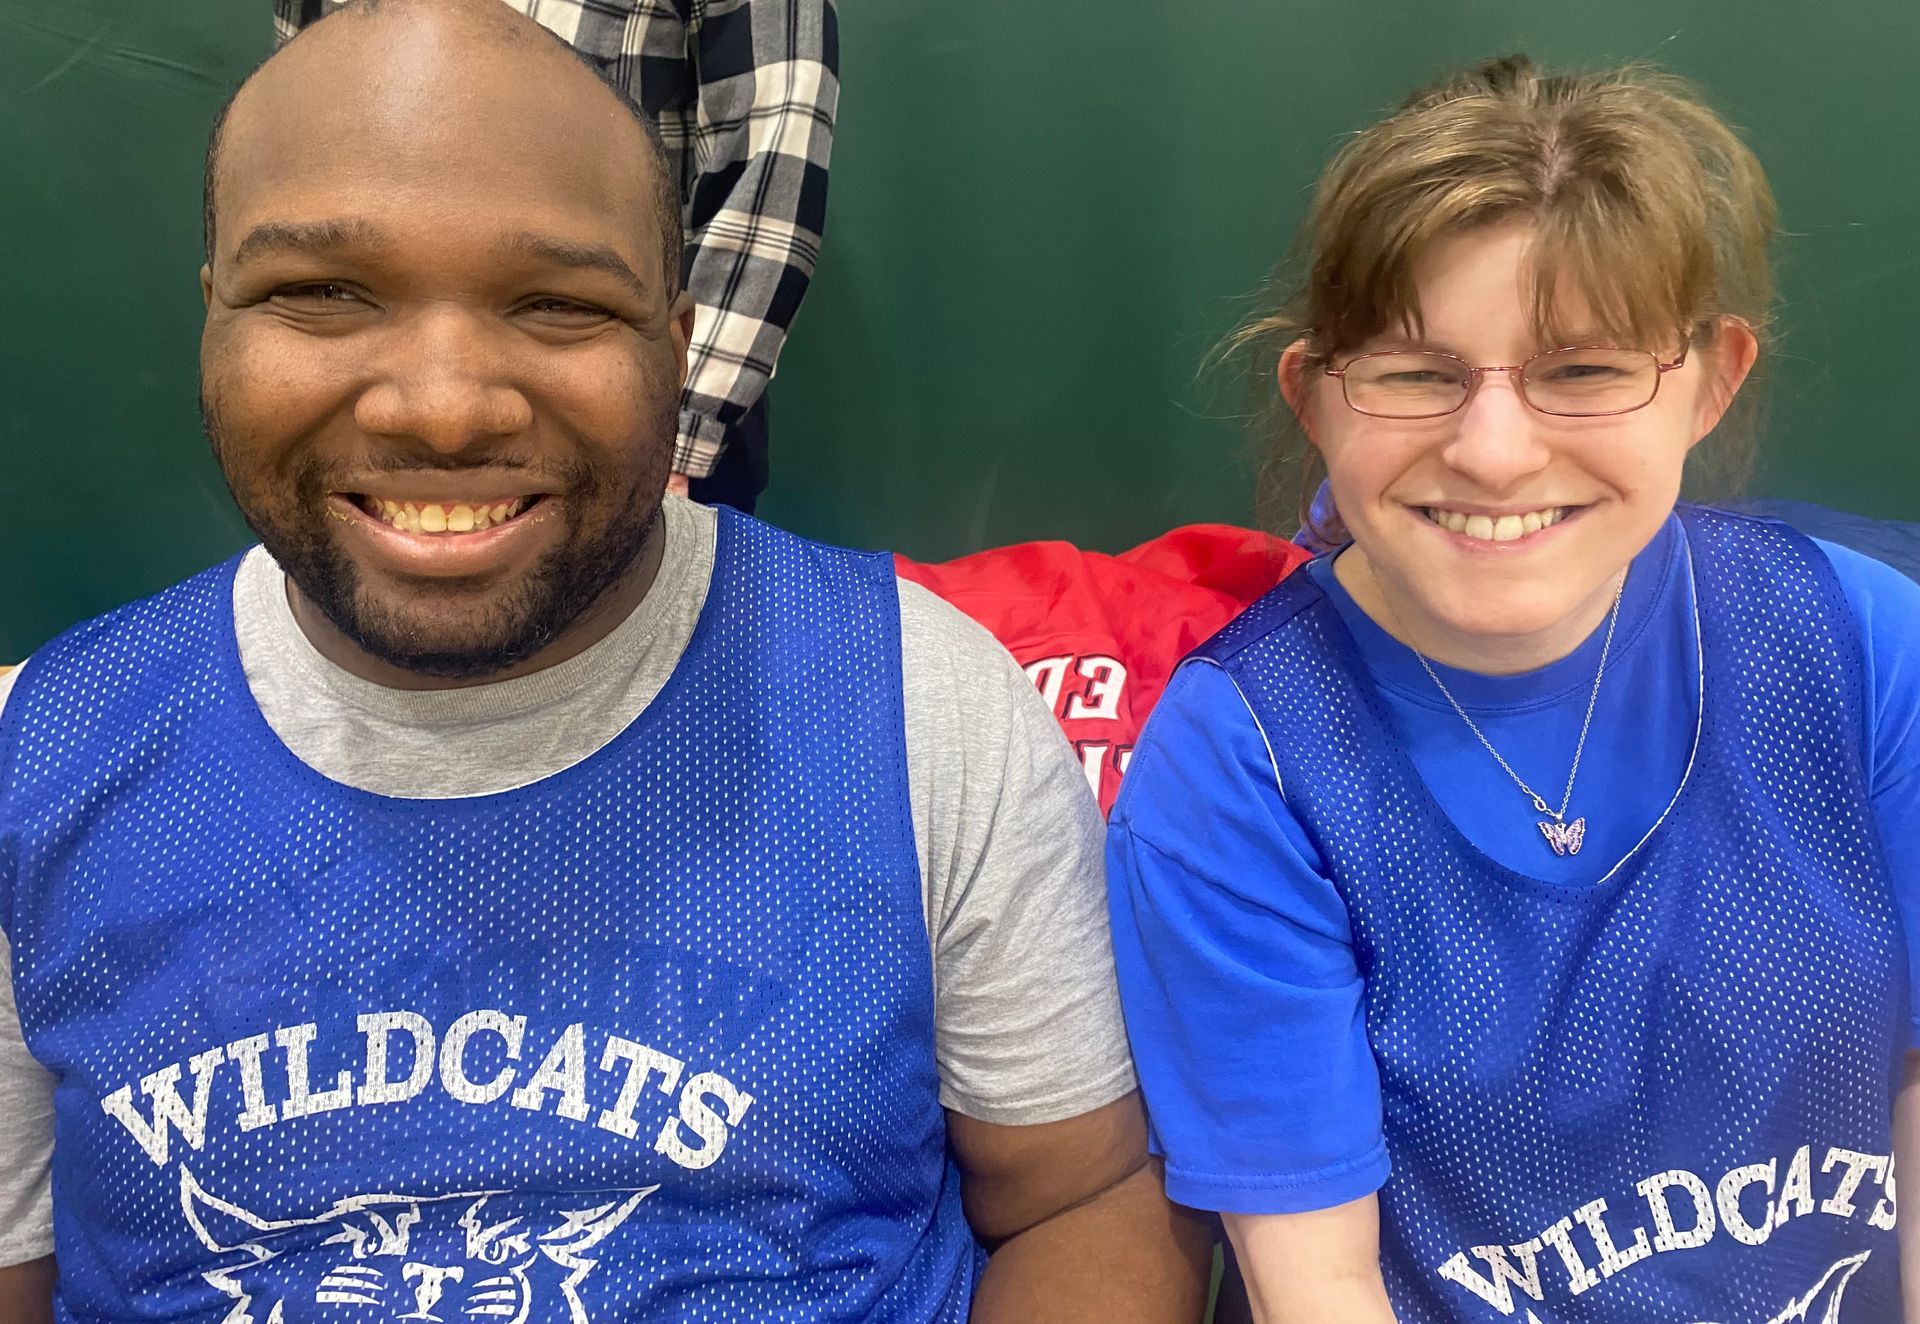 Two Wildcat Basketball players wearing blue jerseys smile for the camera